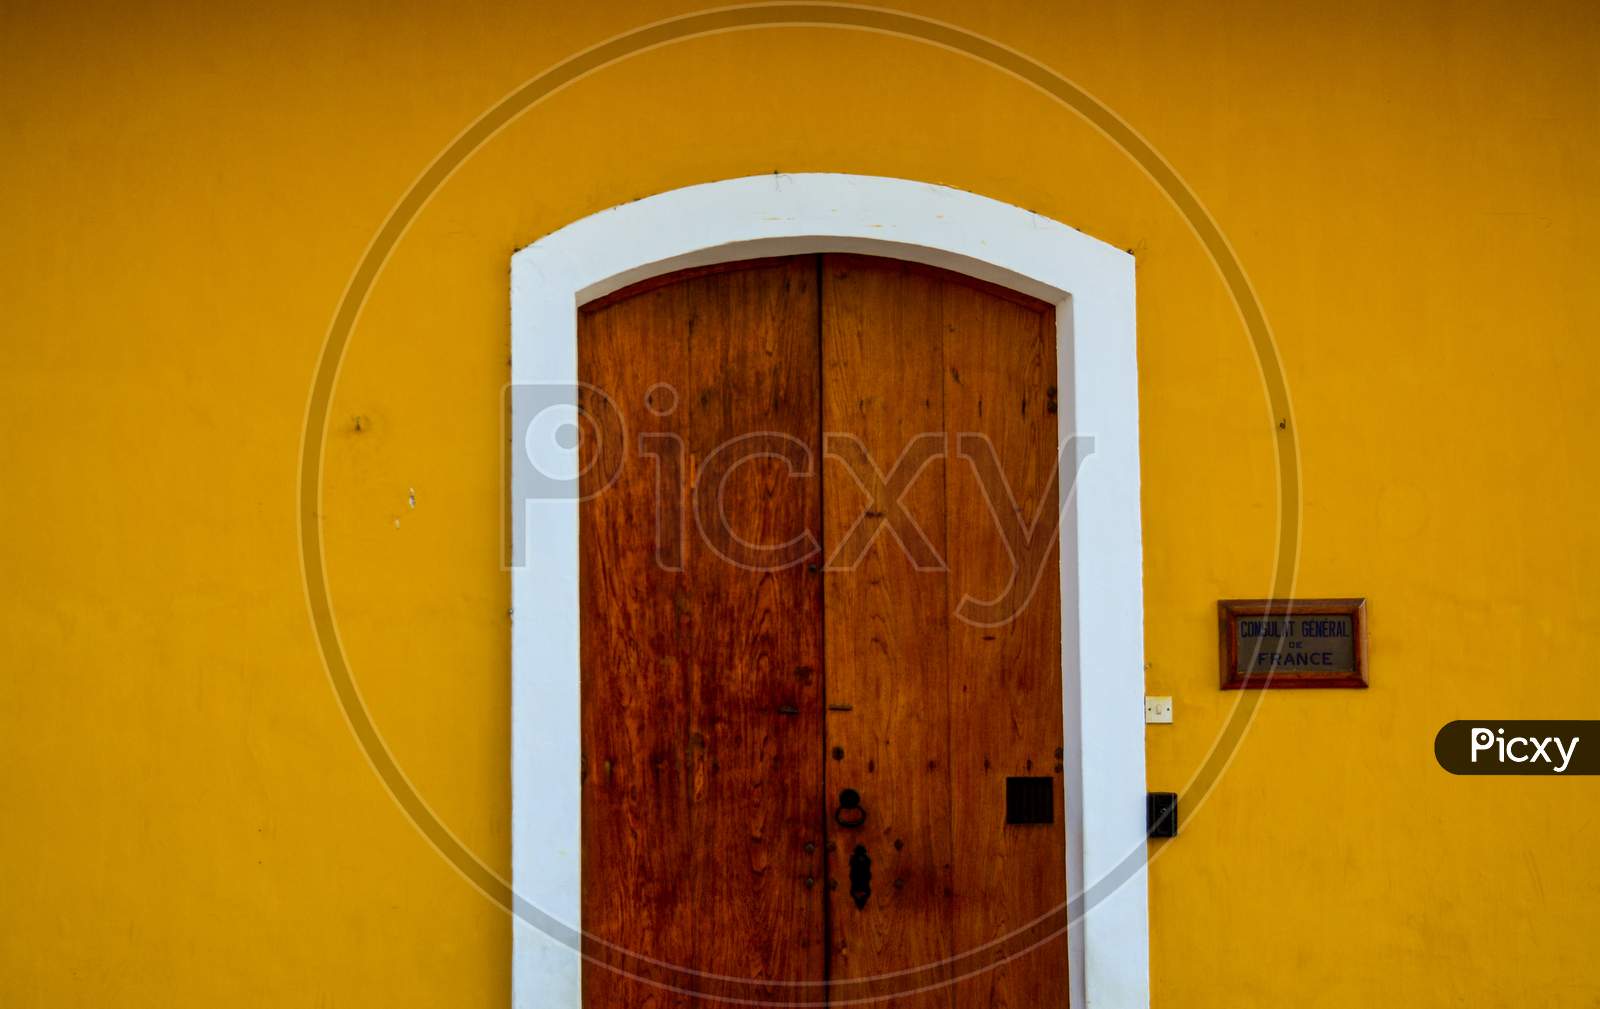 Entry door of French Consulate building in Pondicherry